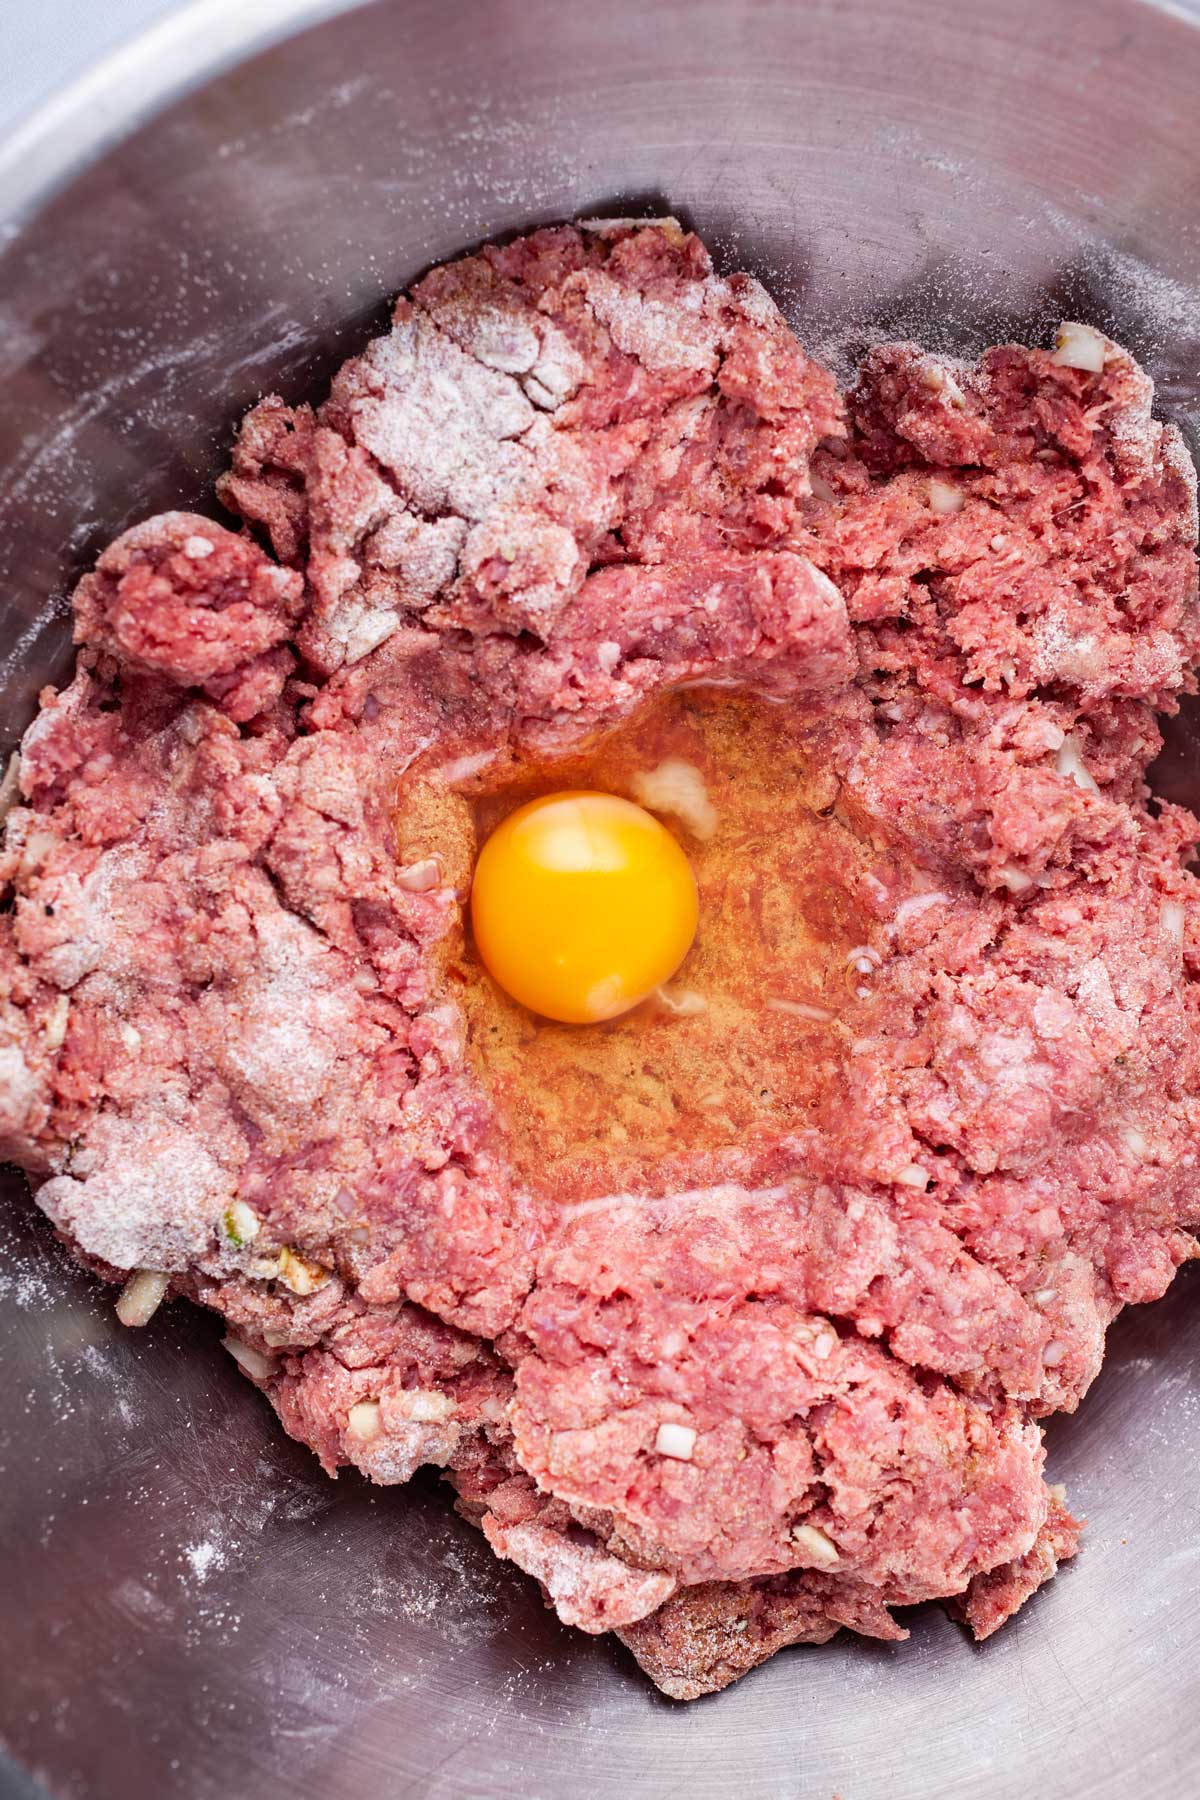 A raw egg nestled in a bed of raw meat in a stainless steel bowl.